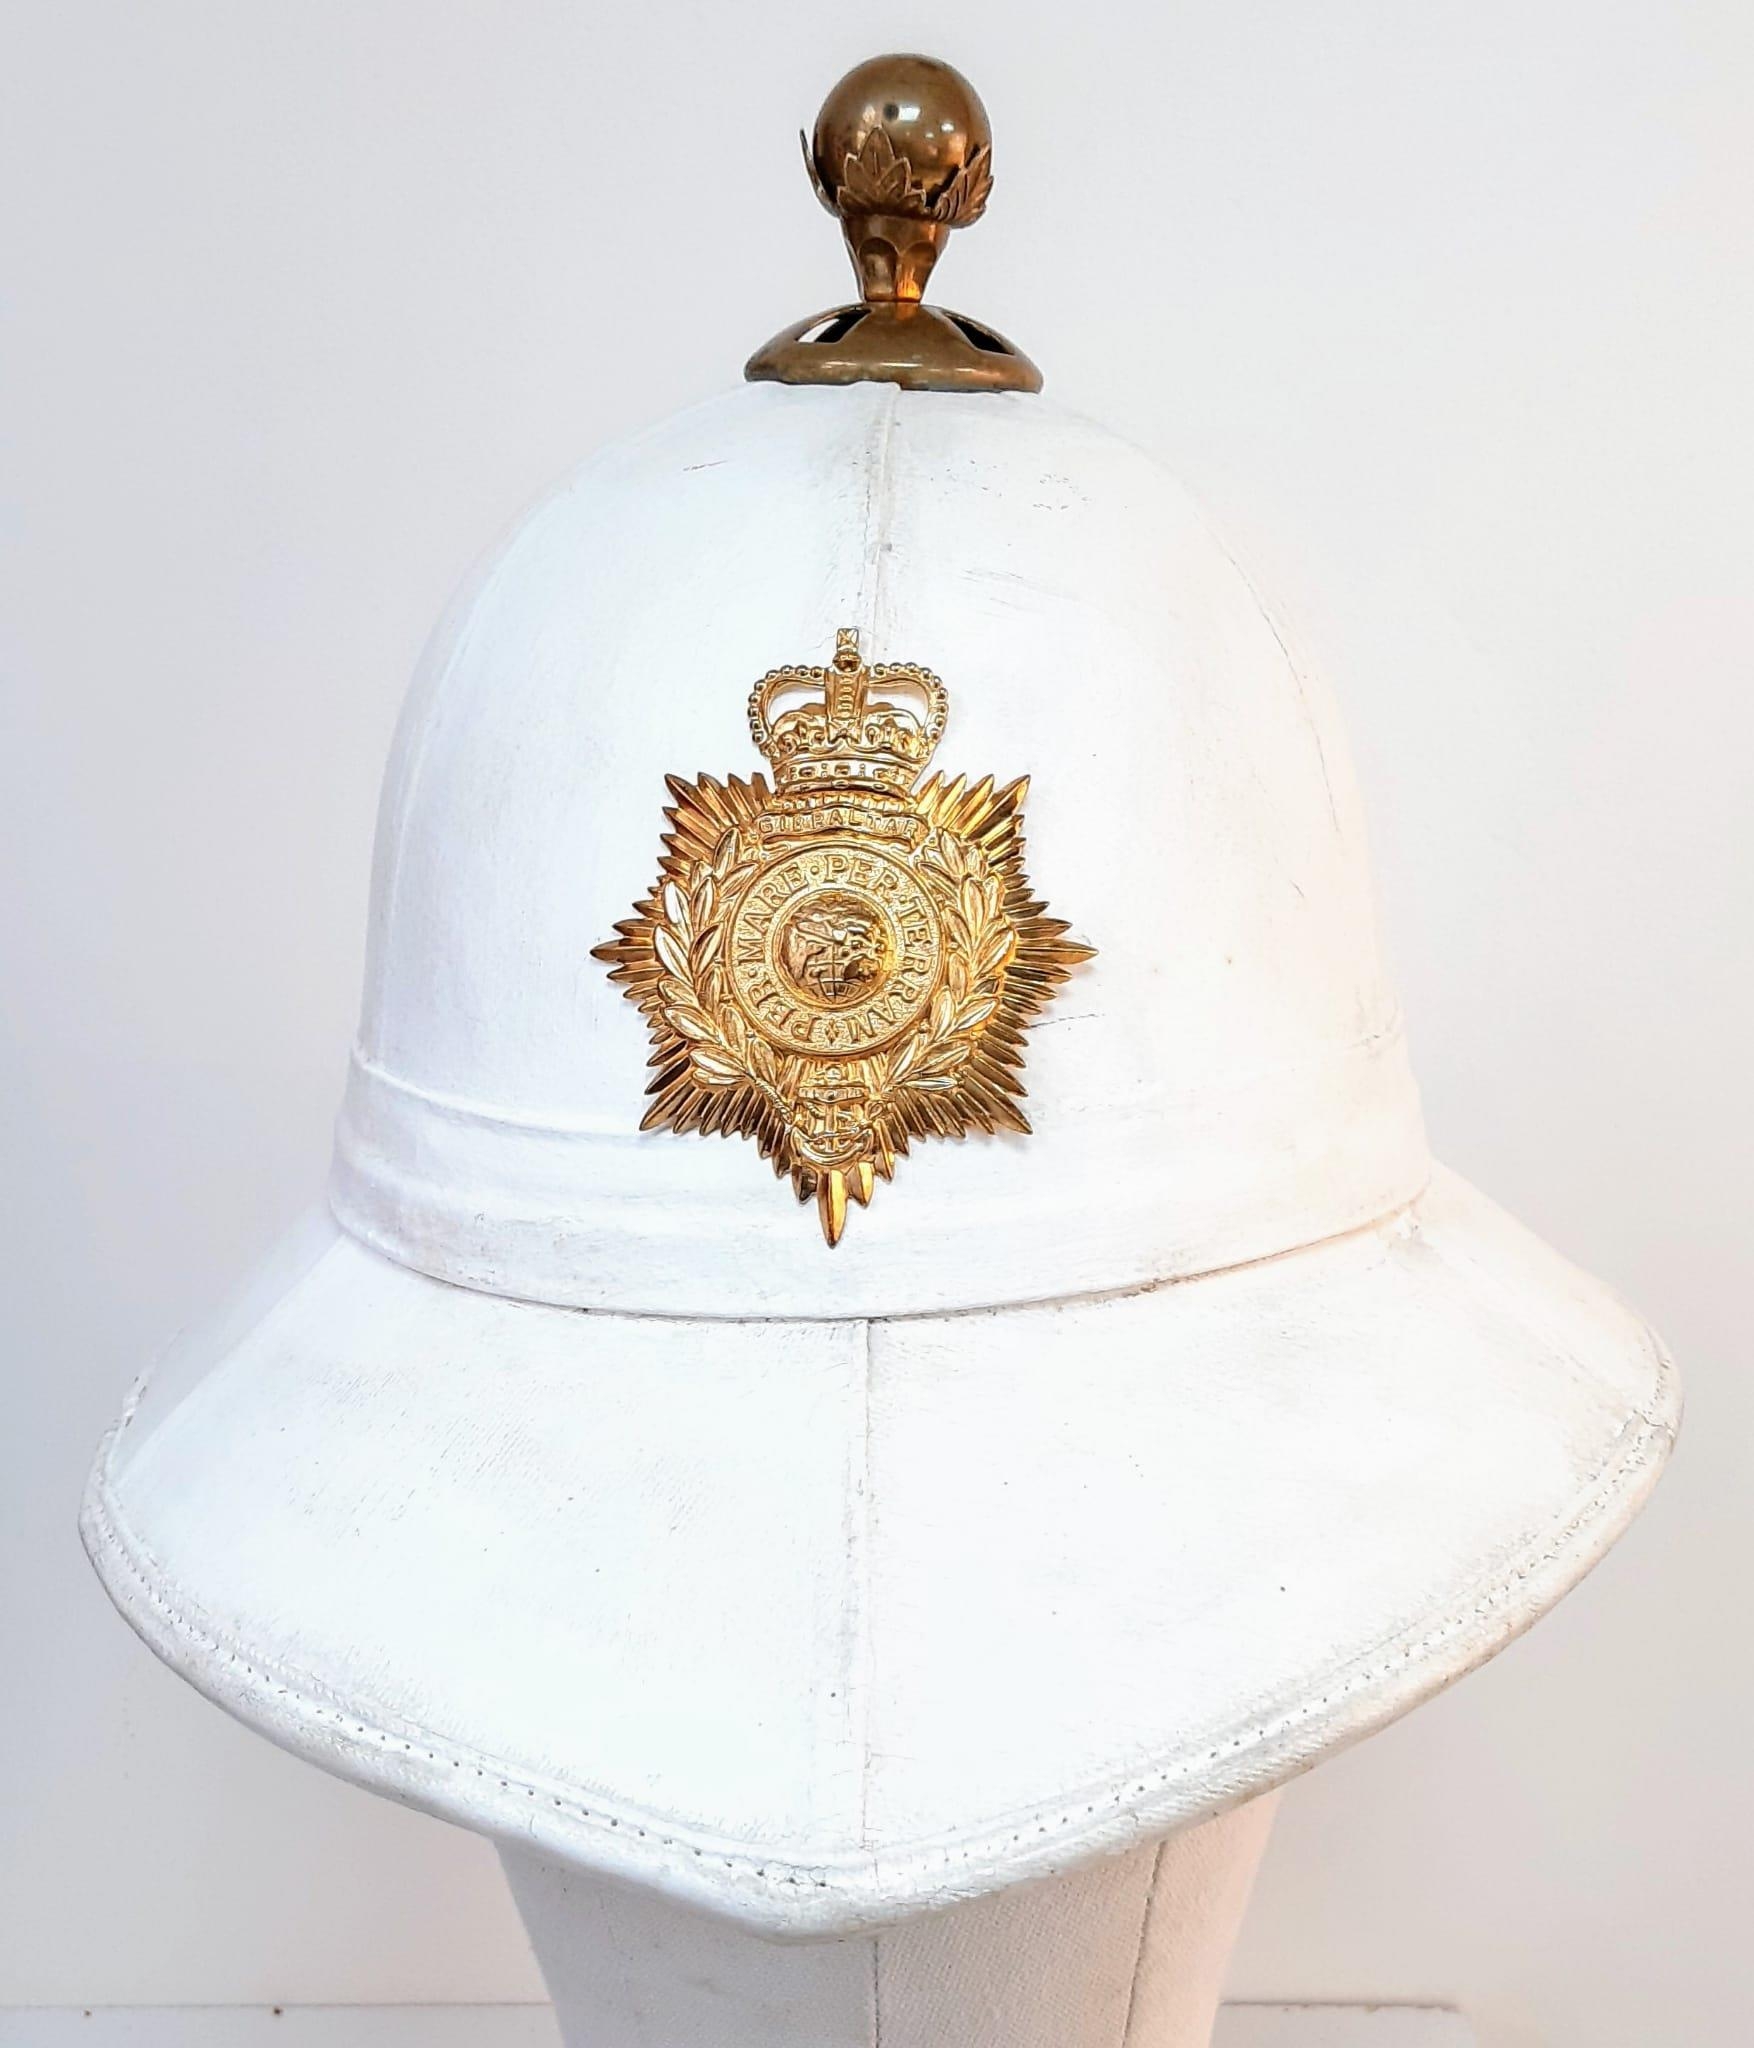 Royal Marines Band Other Ranks Wolseley Pith Helmet with Badge of Queen Elizabeth II (1952-2022).